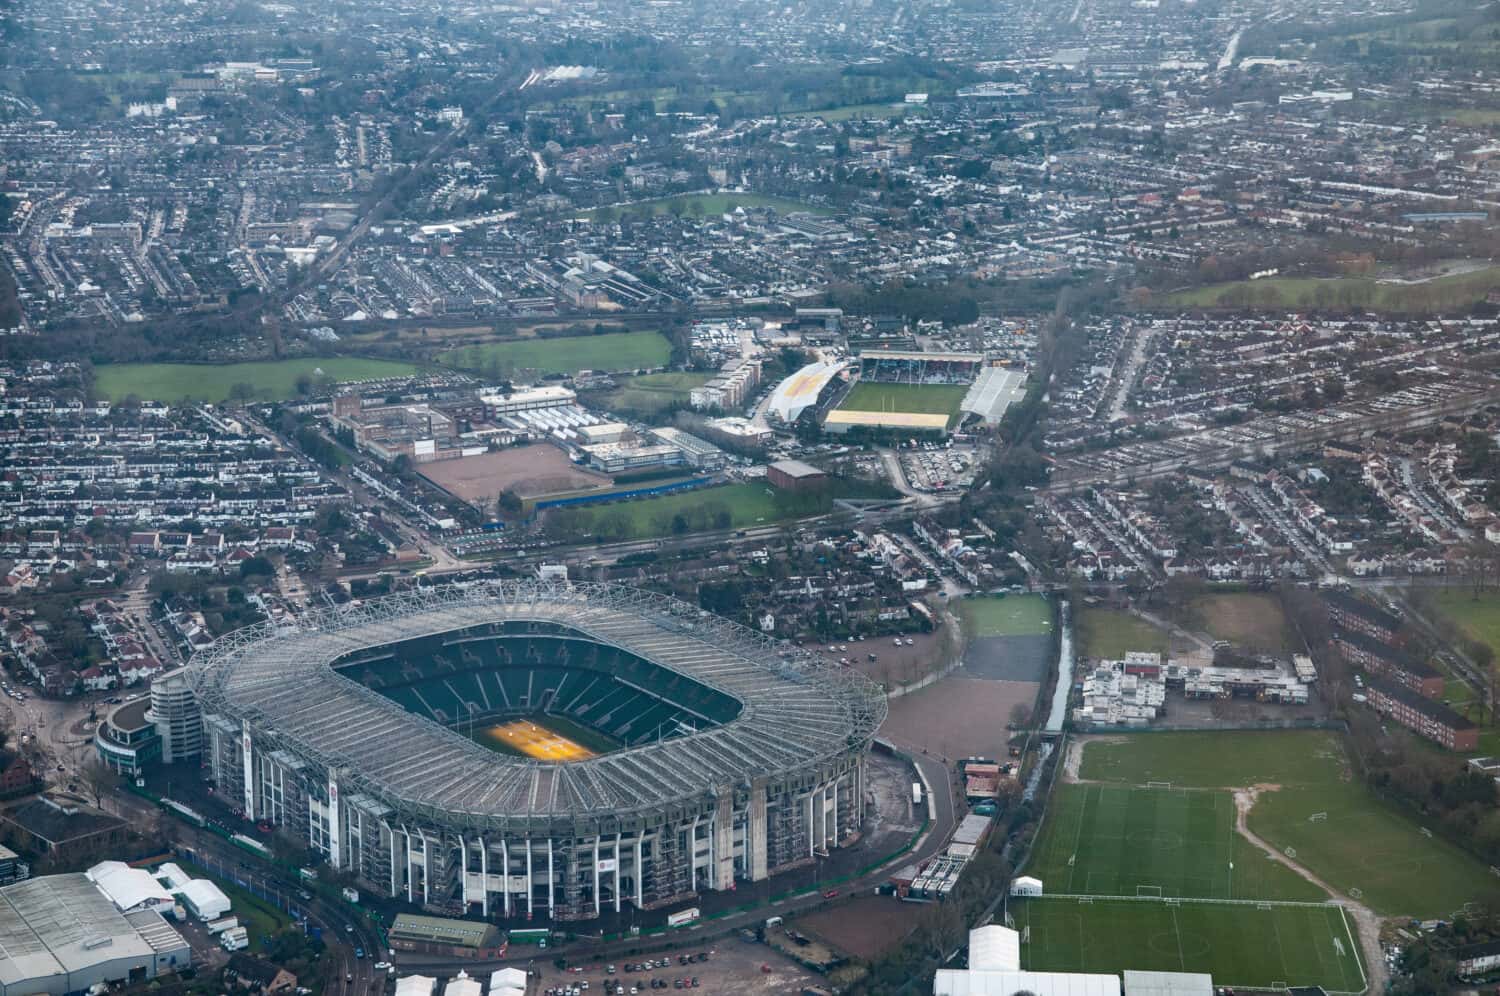 An aerial view of Twickenham and The Stoop rugby grounds taken from the north.